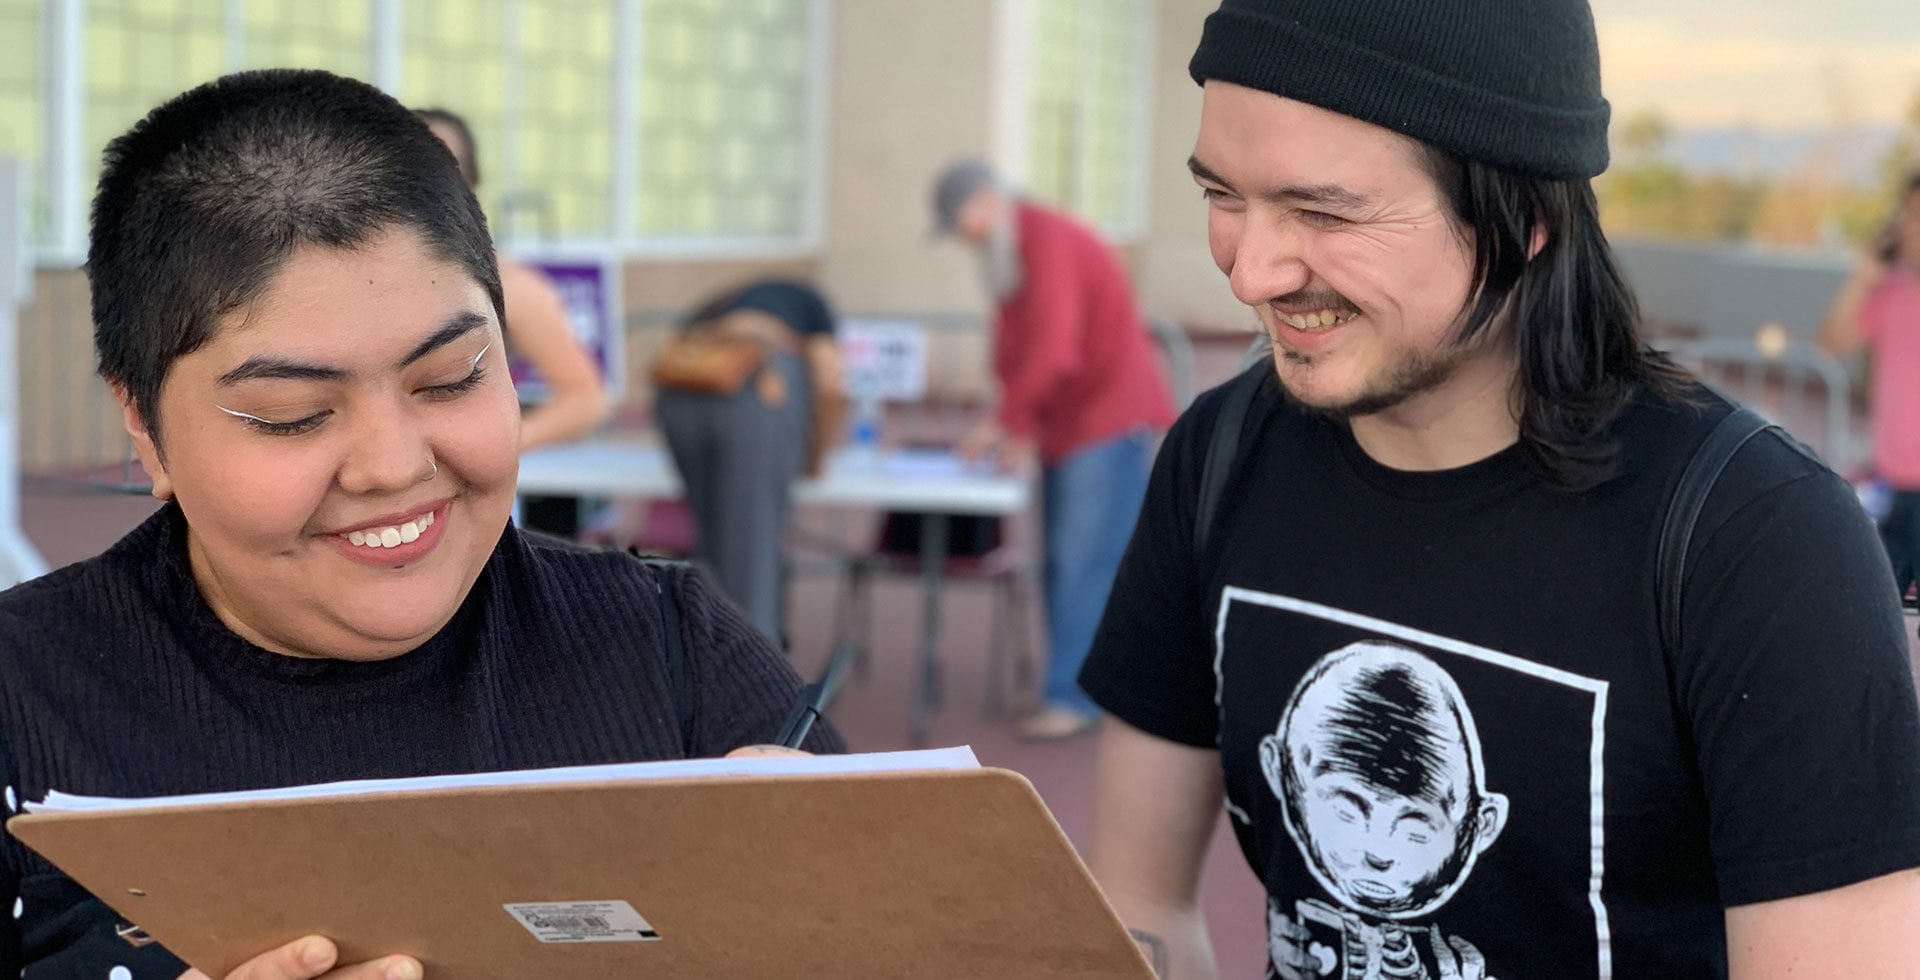 Two young adults smile while filling out a form on a clipboard at an outdoor event